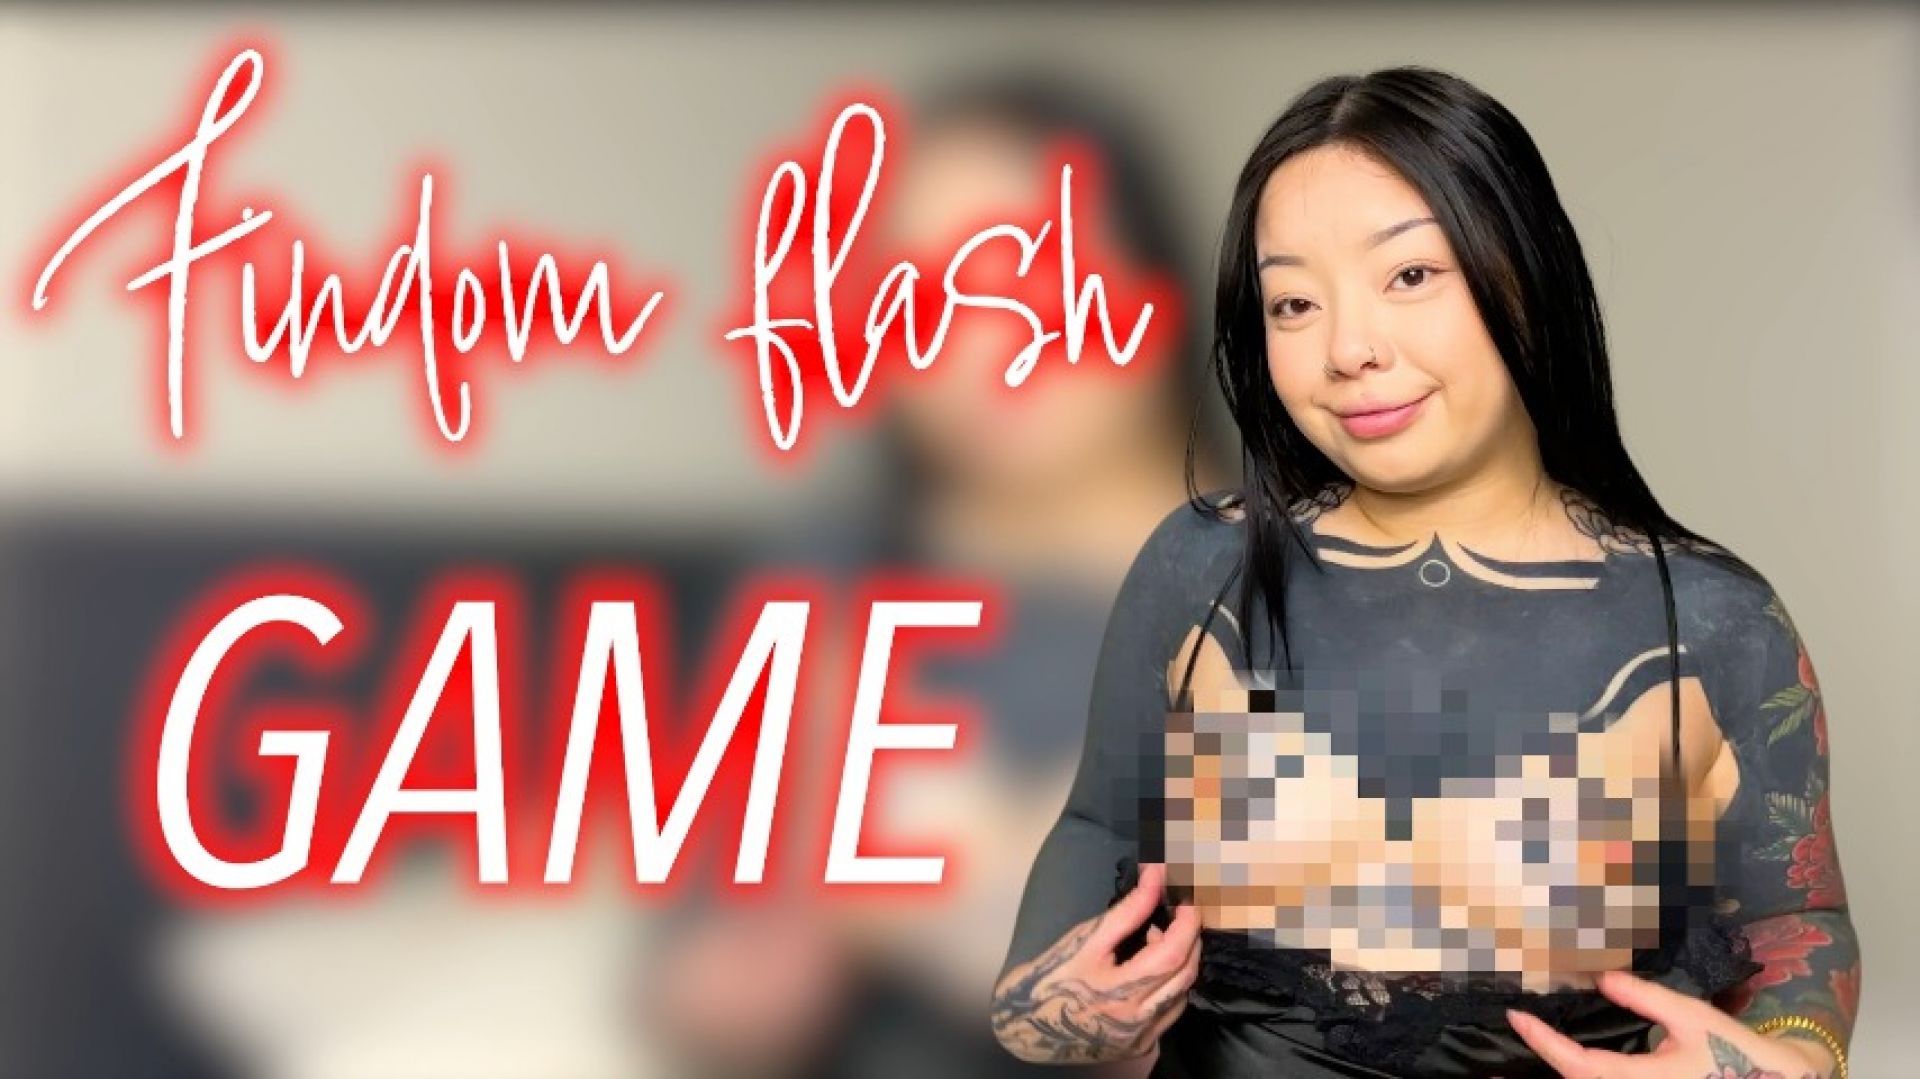 Findom Flash Game. I Flash, You Pay